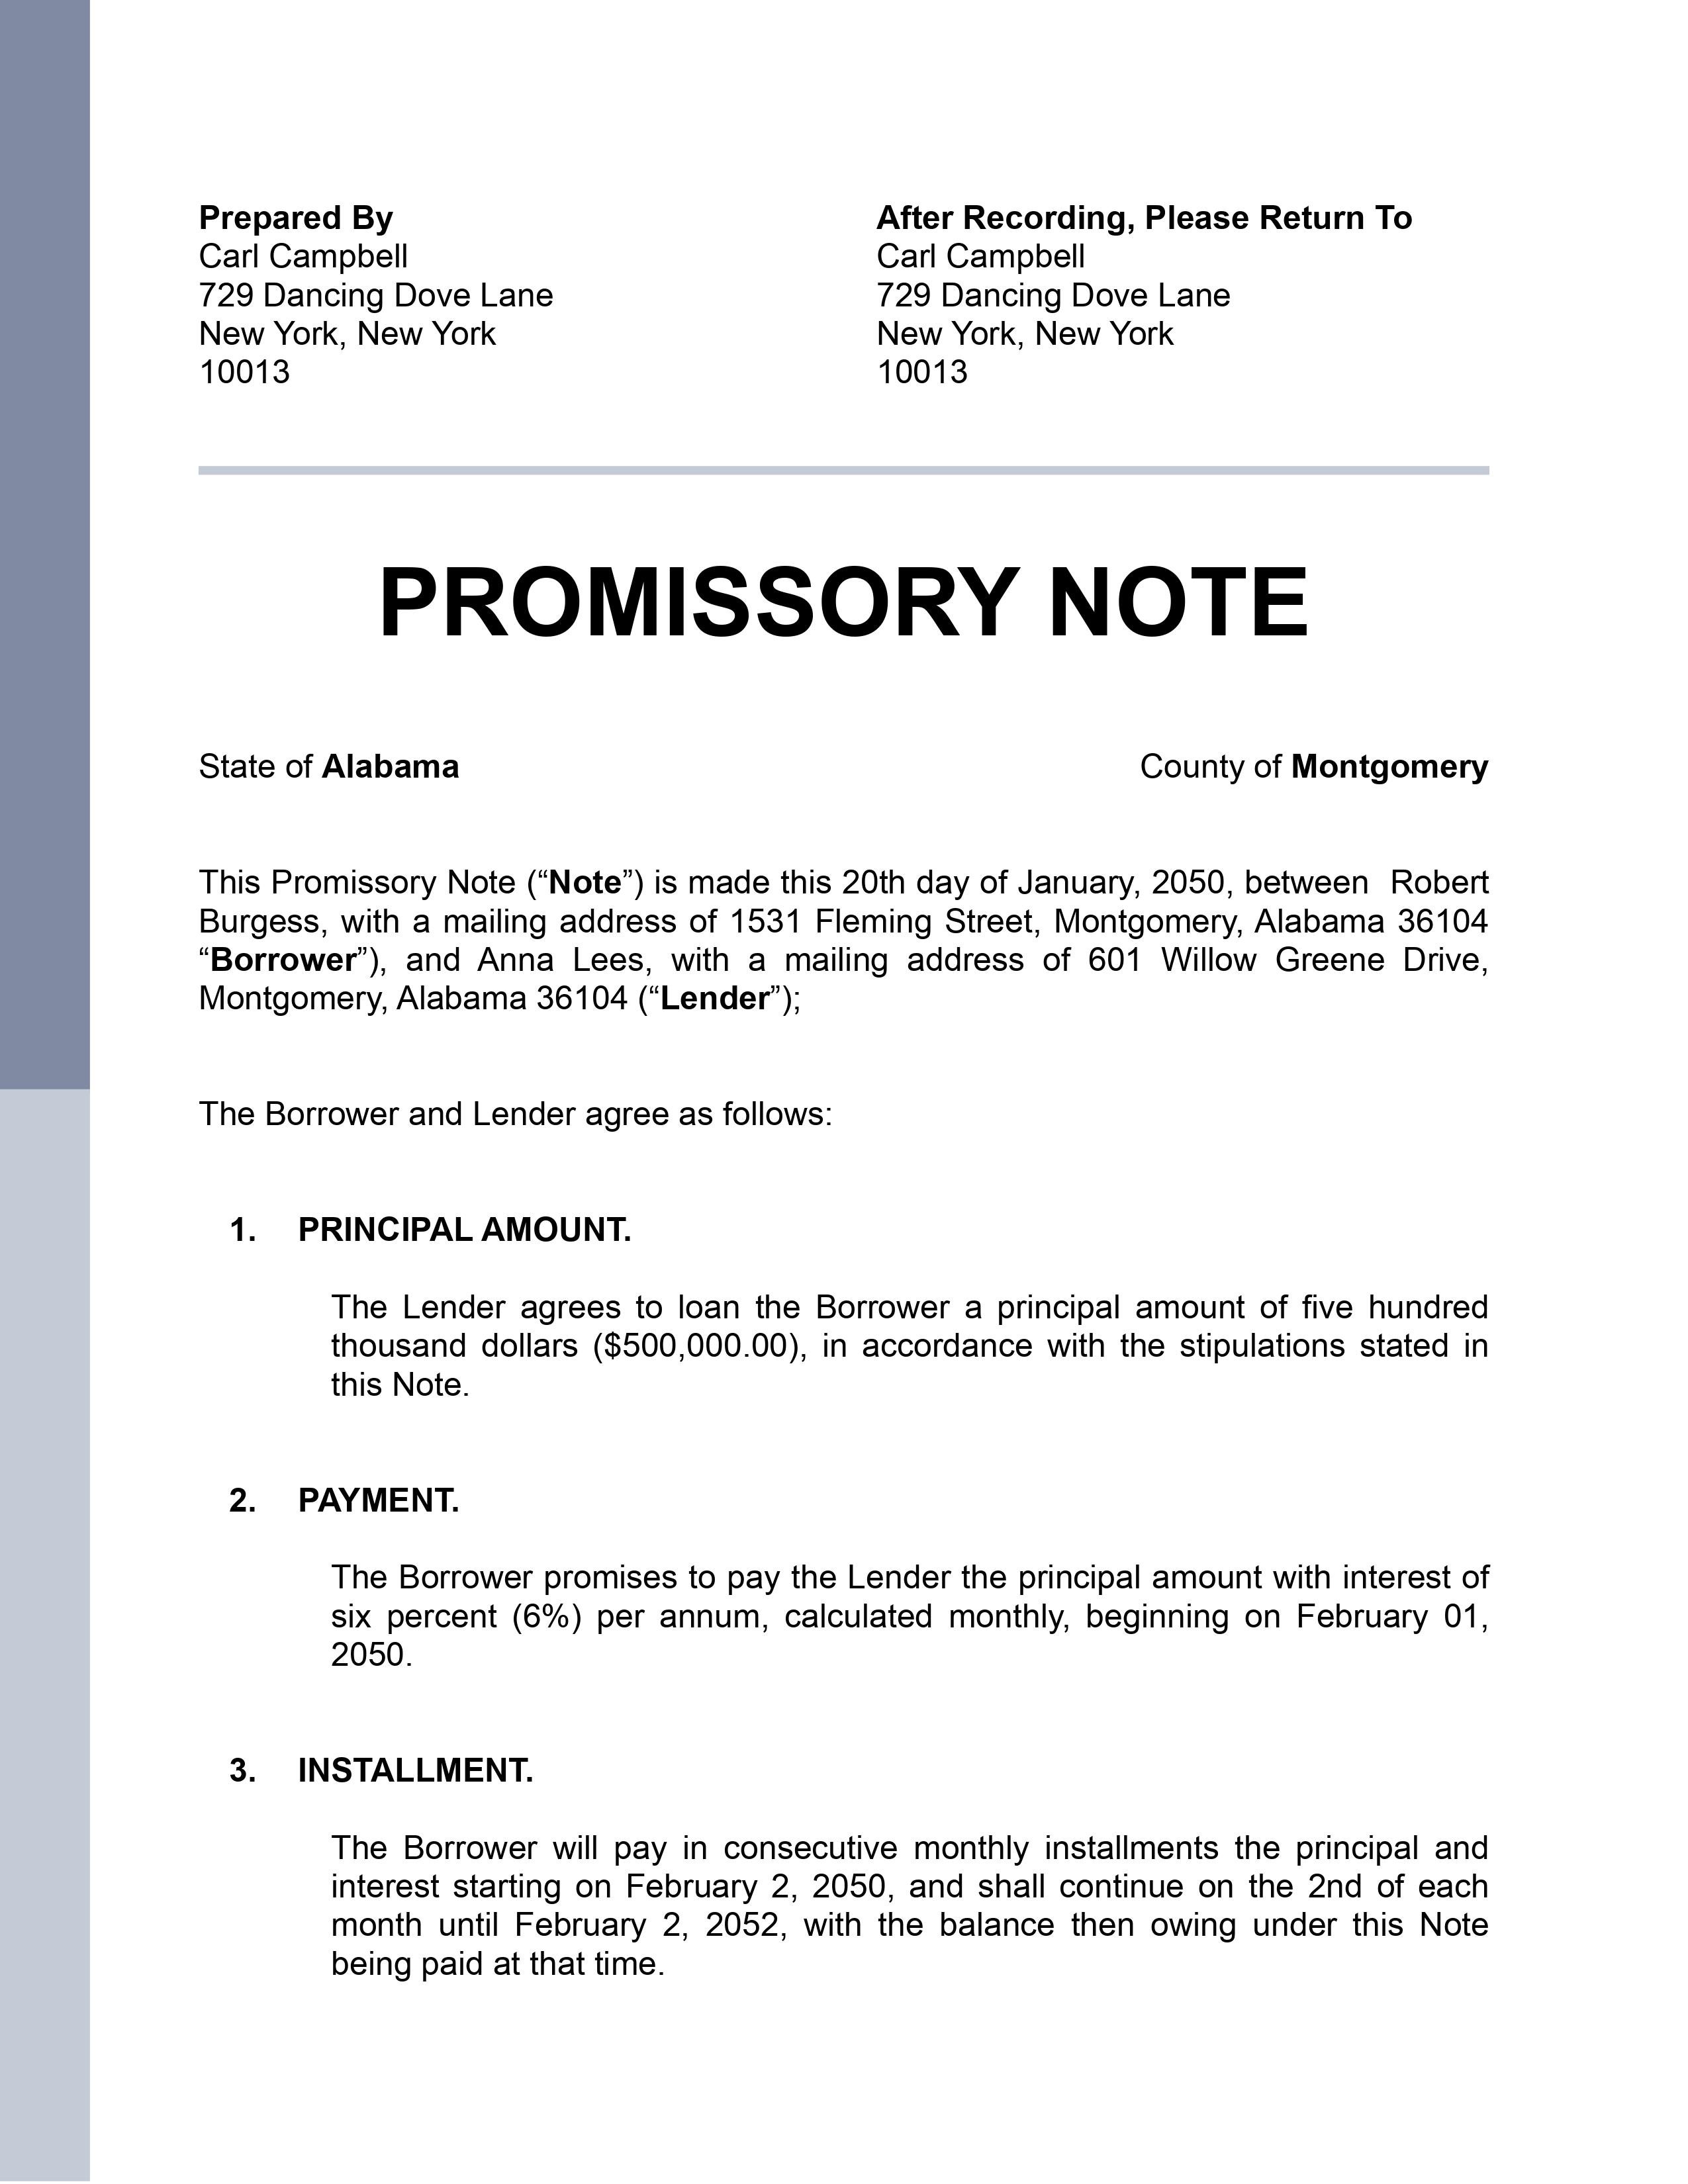 case study on promissory notes